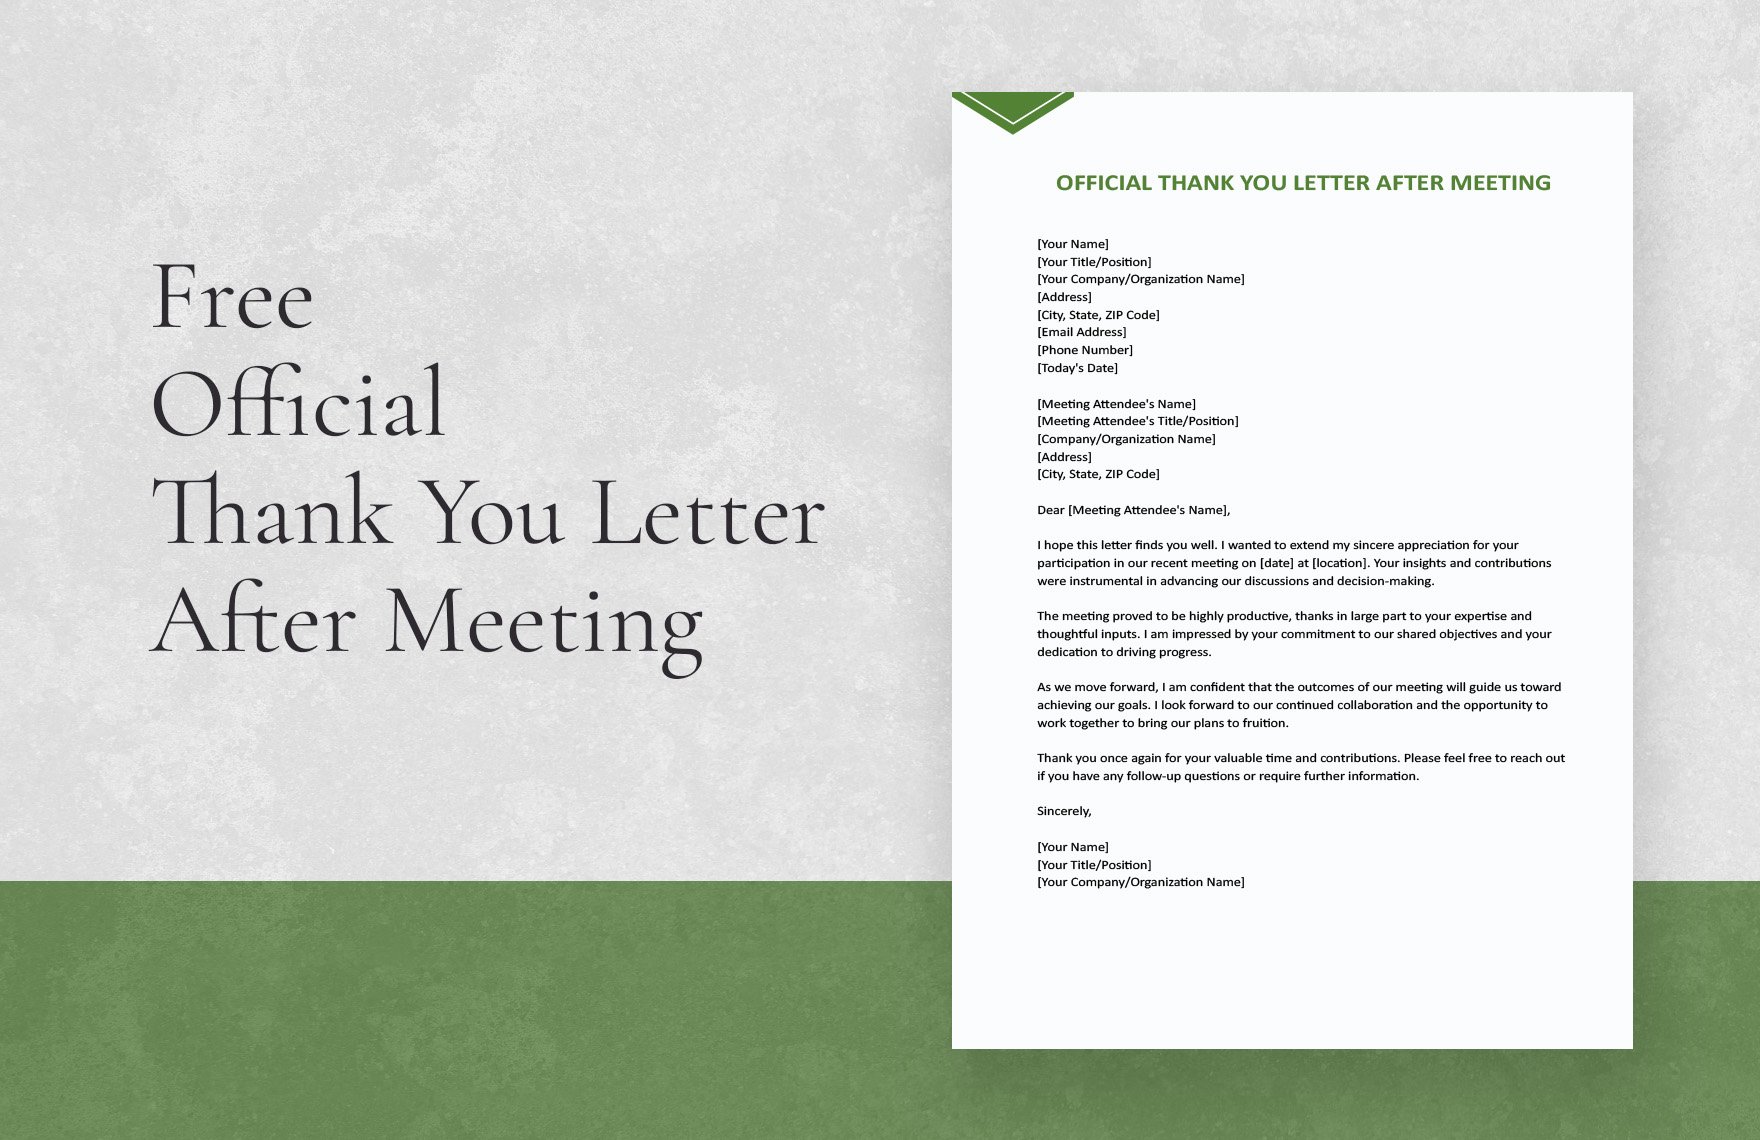 Official Thank You Letter After Meeting